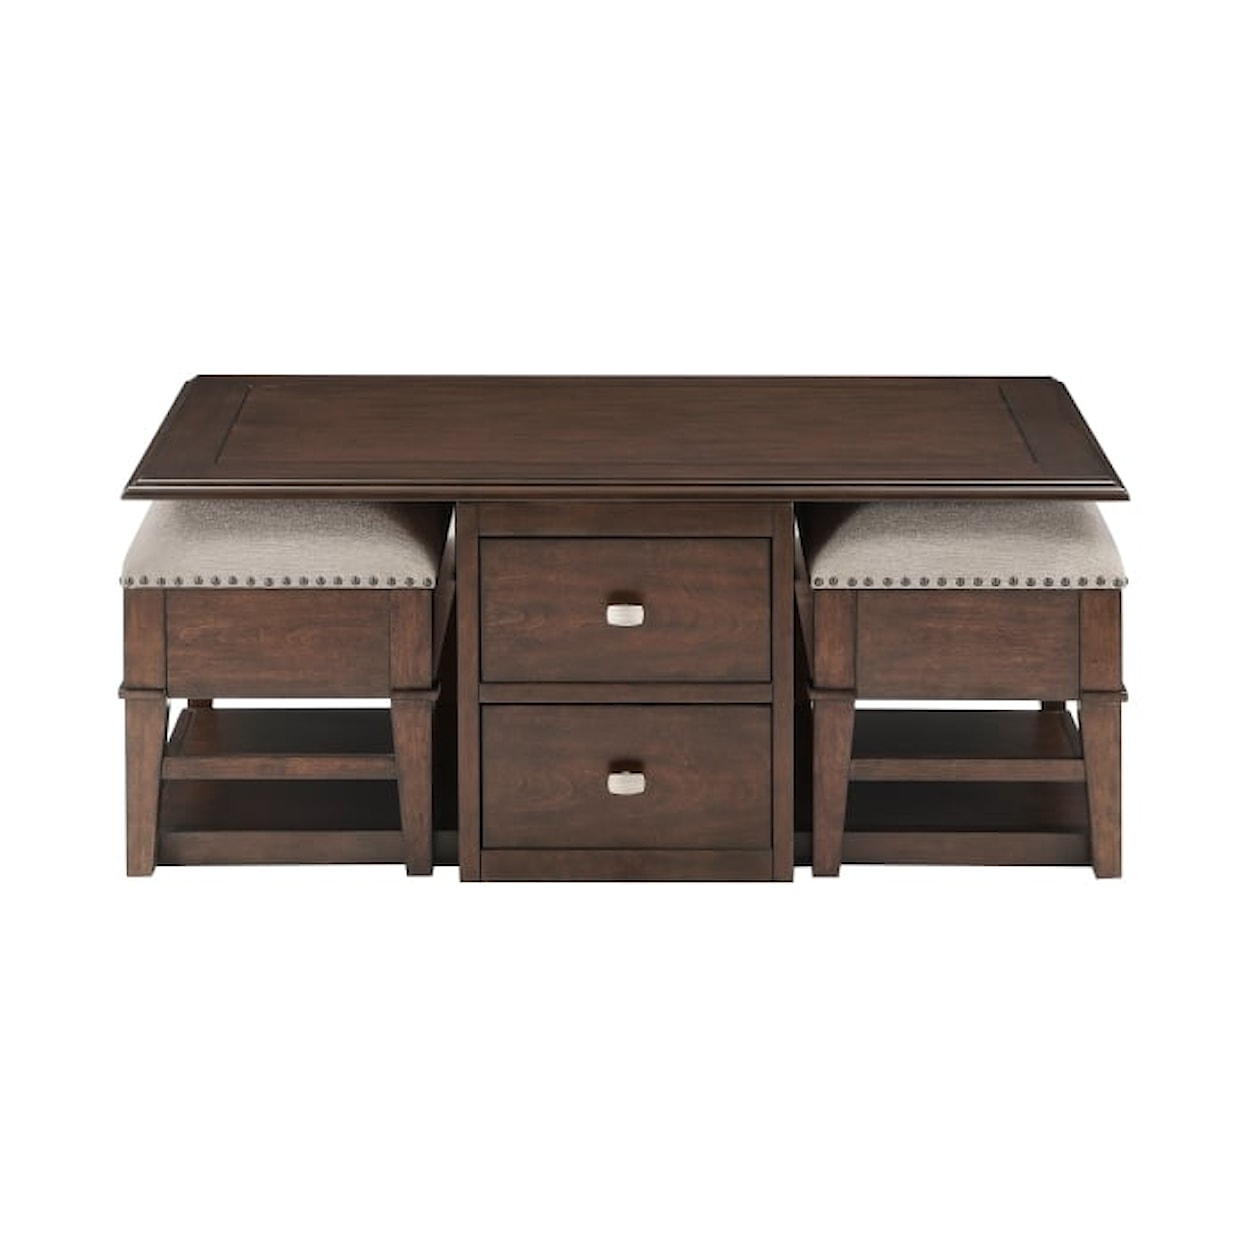 Homelegance Claremore Cocktail Table with Two Benches